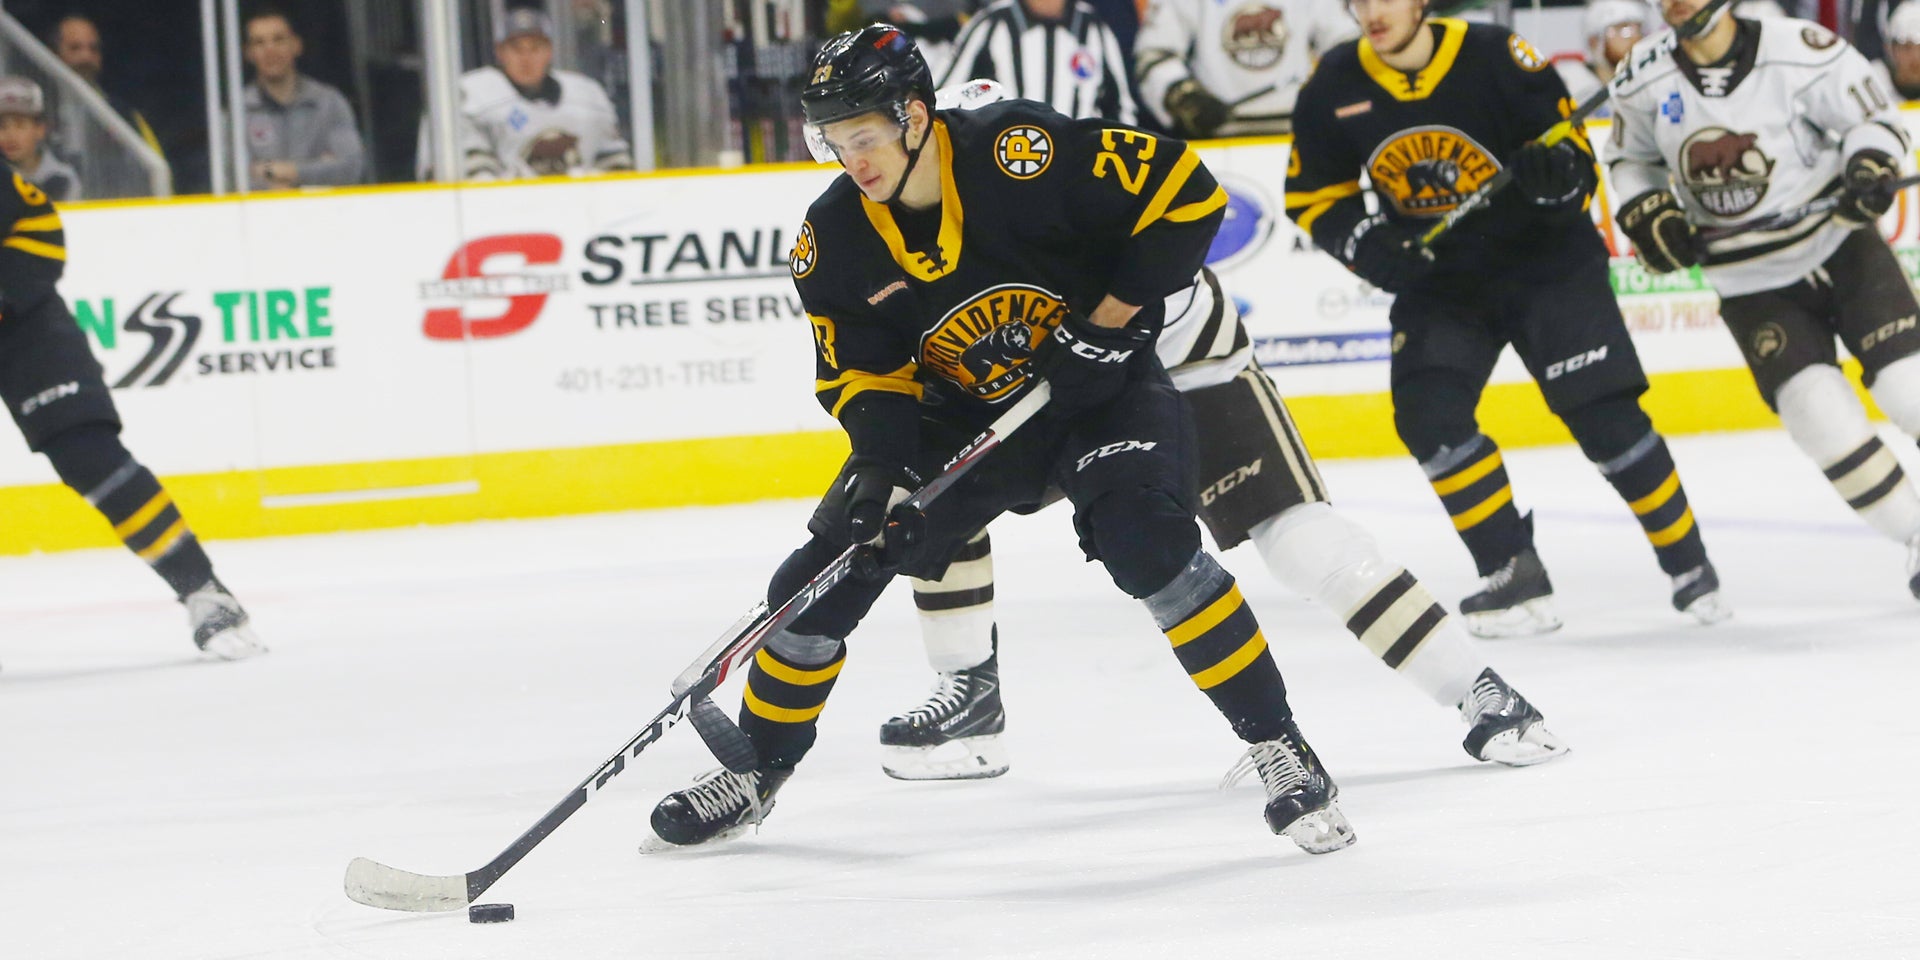 STUDNICKA AMONG P-BRUINS ON RETURN TO PLAY ROSTER